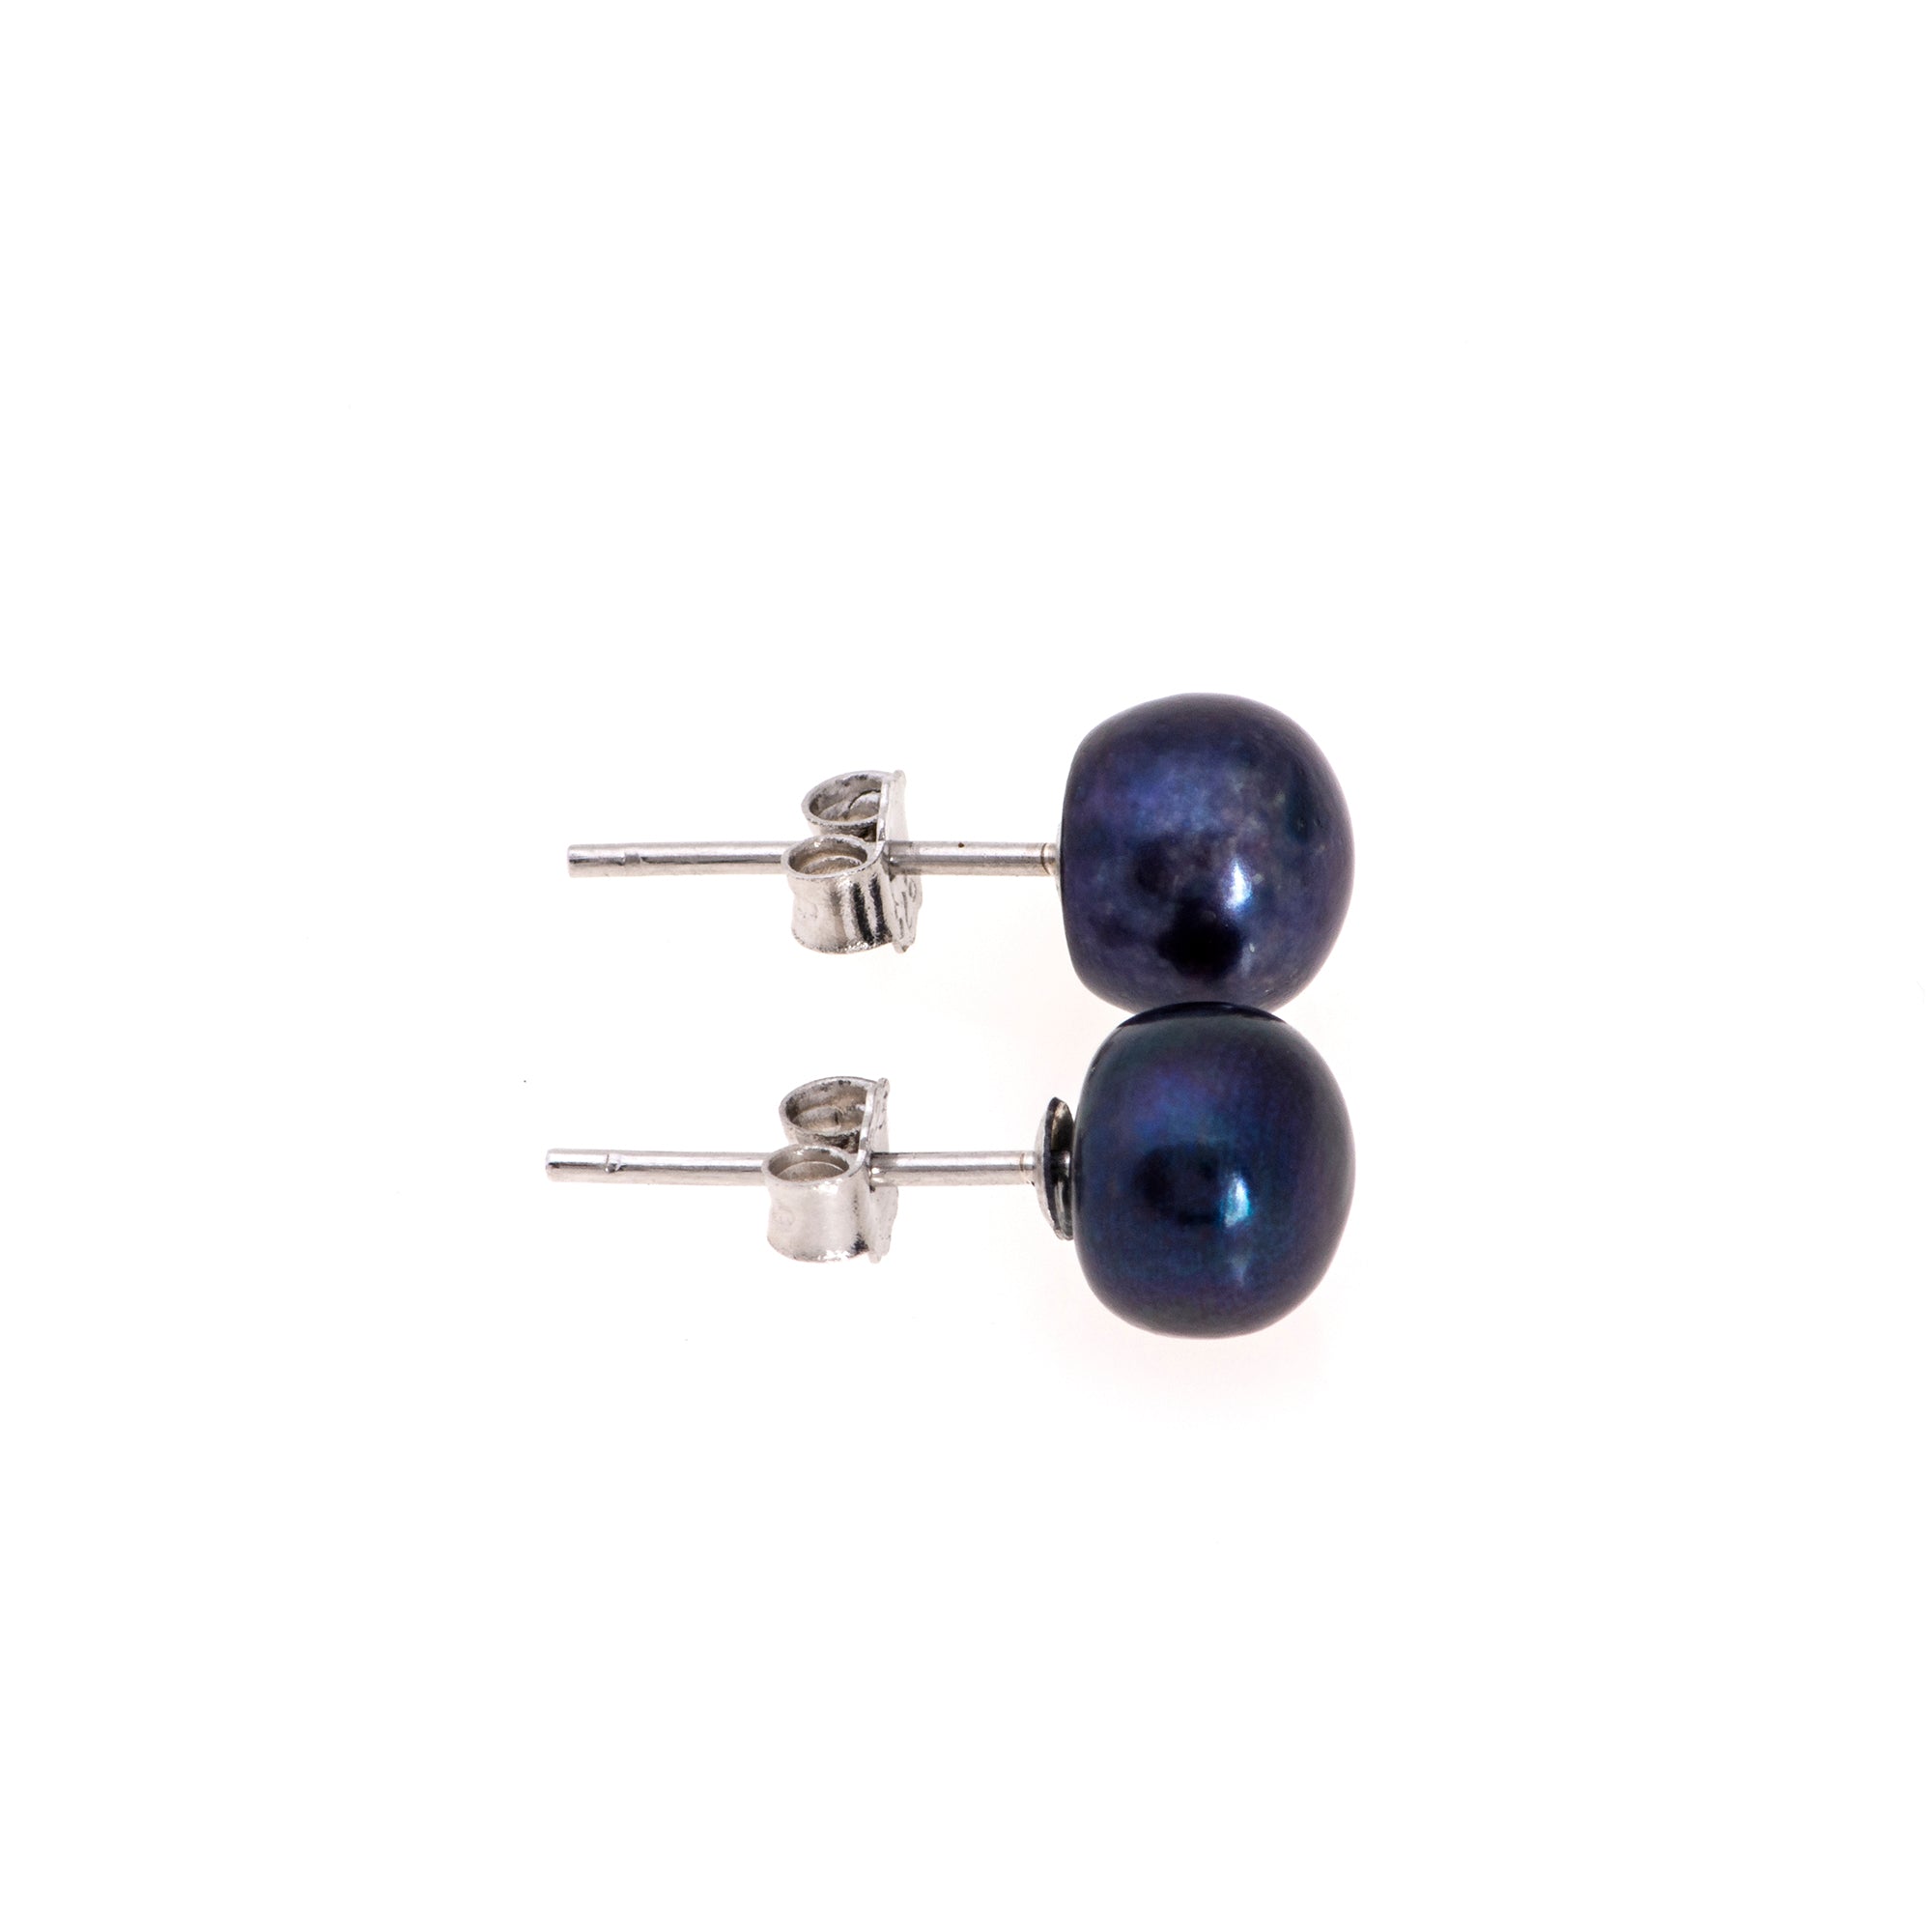 Thomas Sabo Silver and Blue Earrings - Jewellery from Faith Jewellers UK